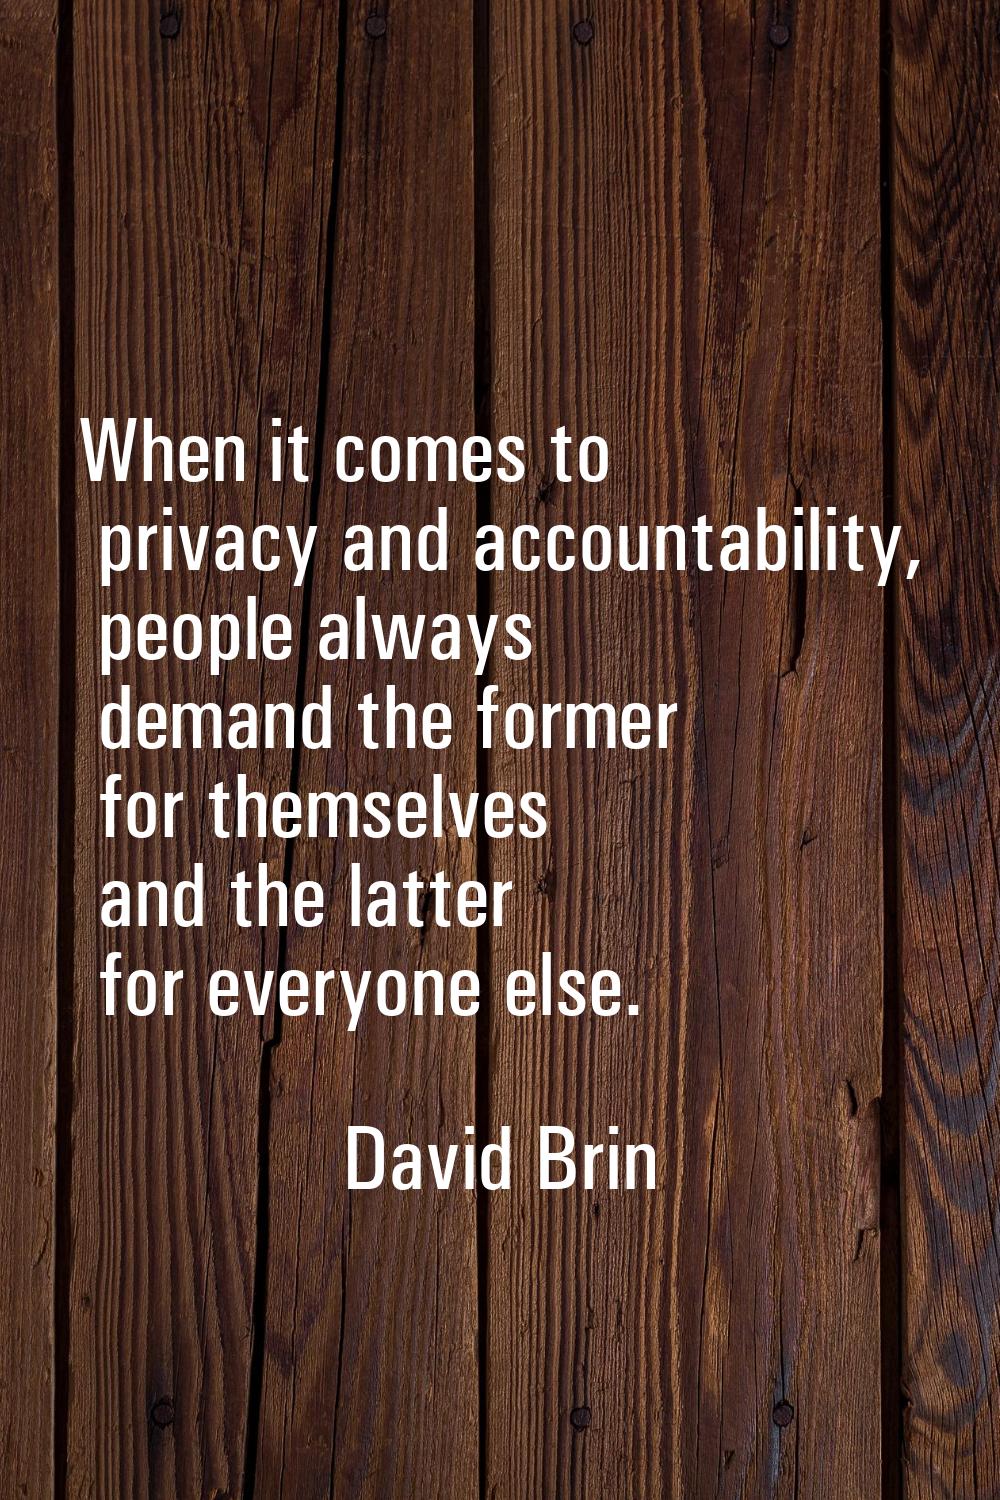 When it comes to privacy and accountability, people always demand the former for themselves and the